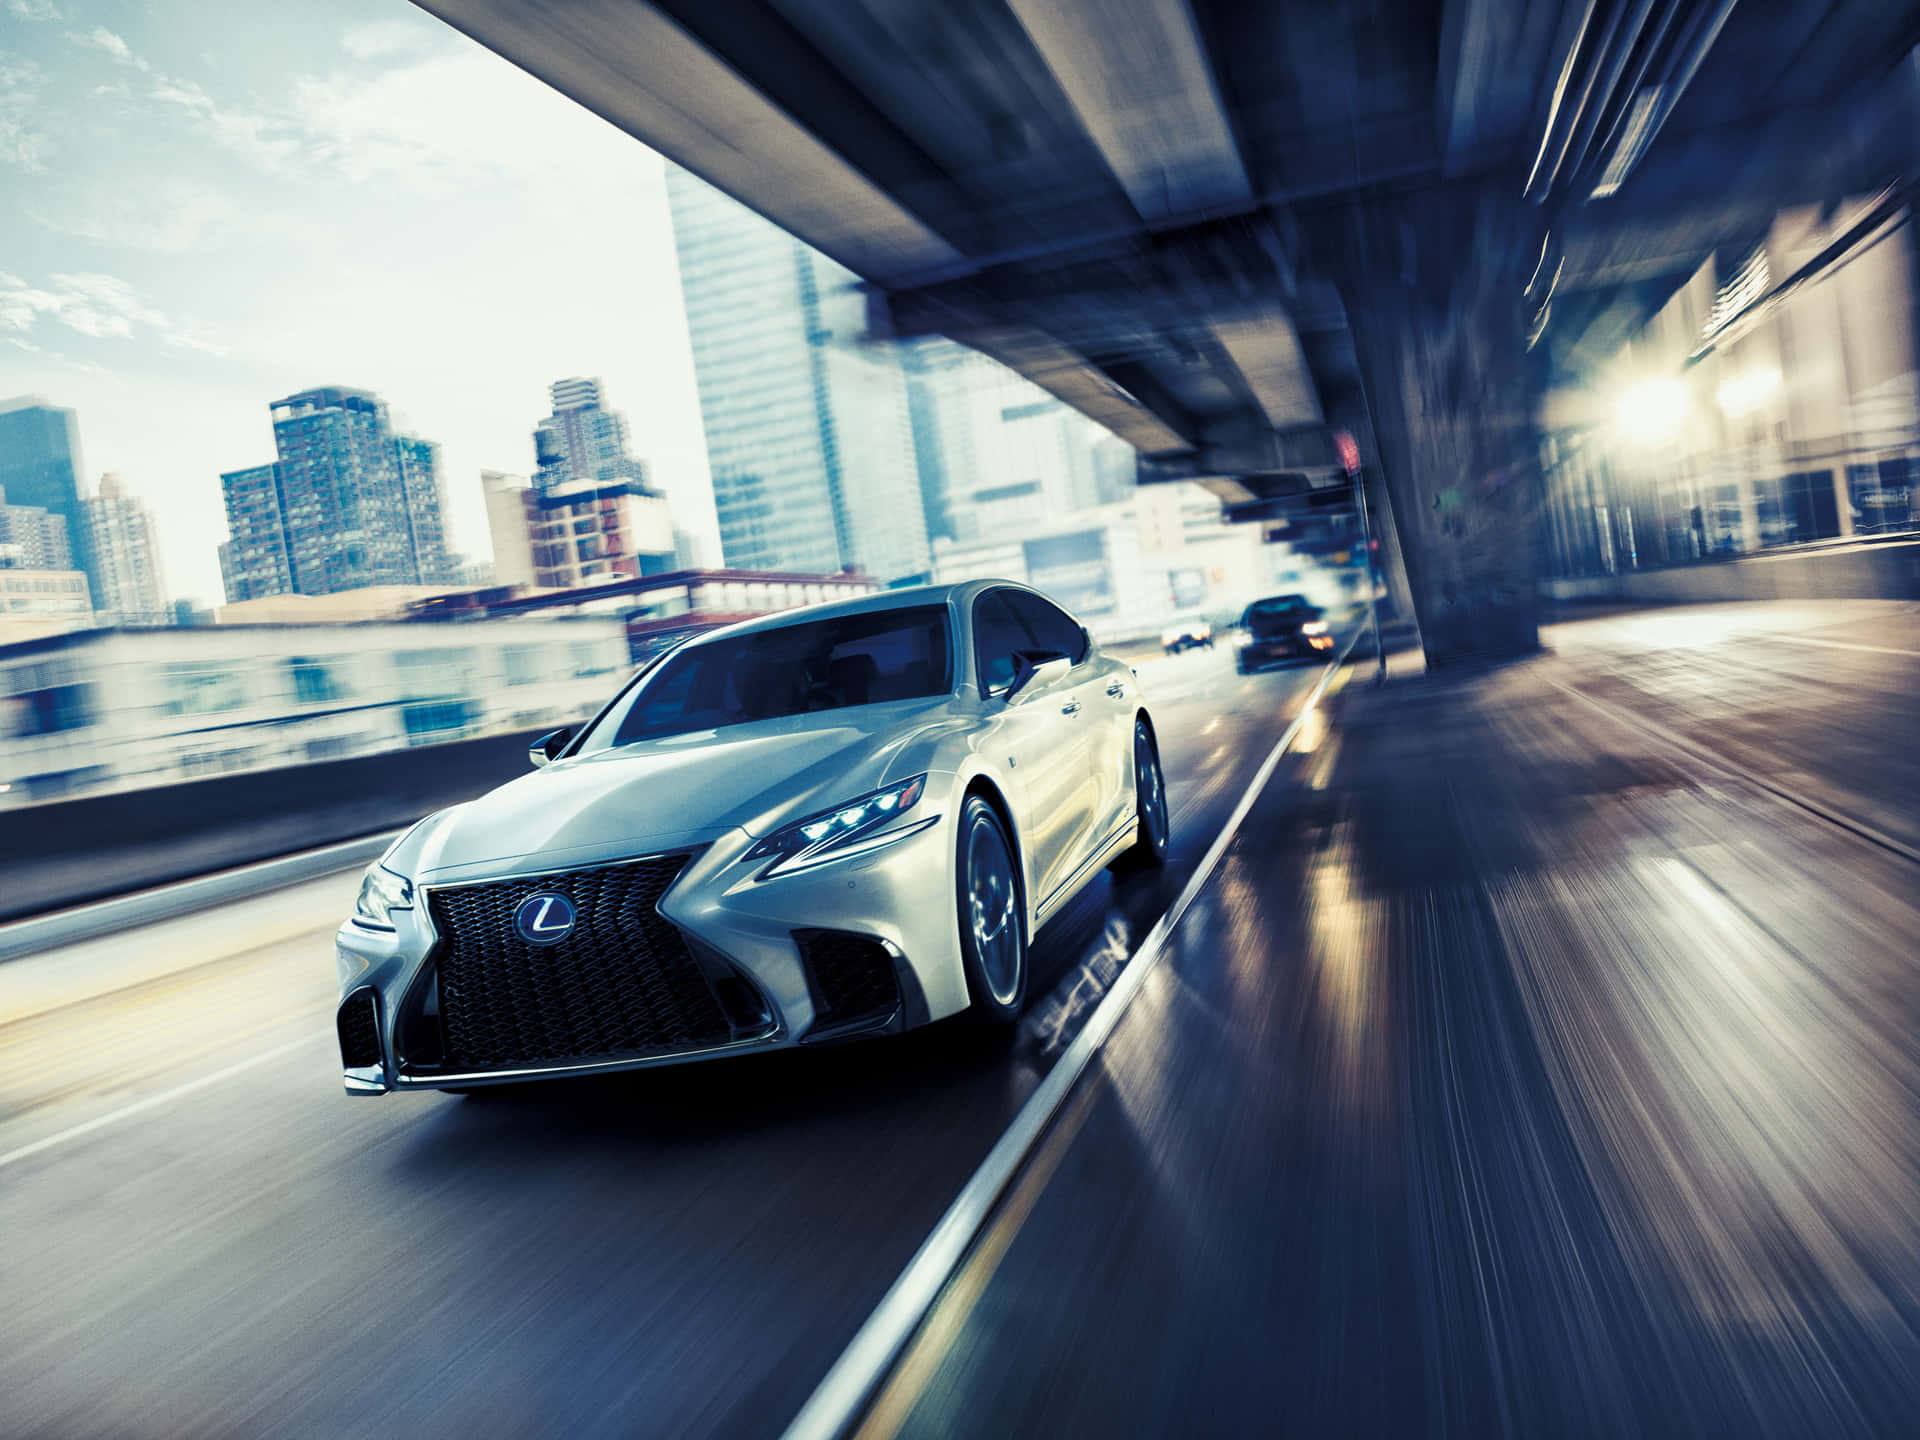 Caption: A stunning Lexus LS 500 in motion on a scenic road. Wallpaper